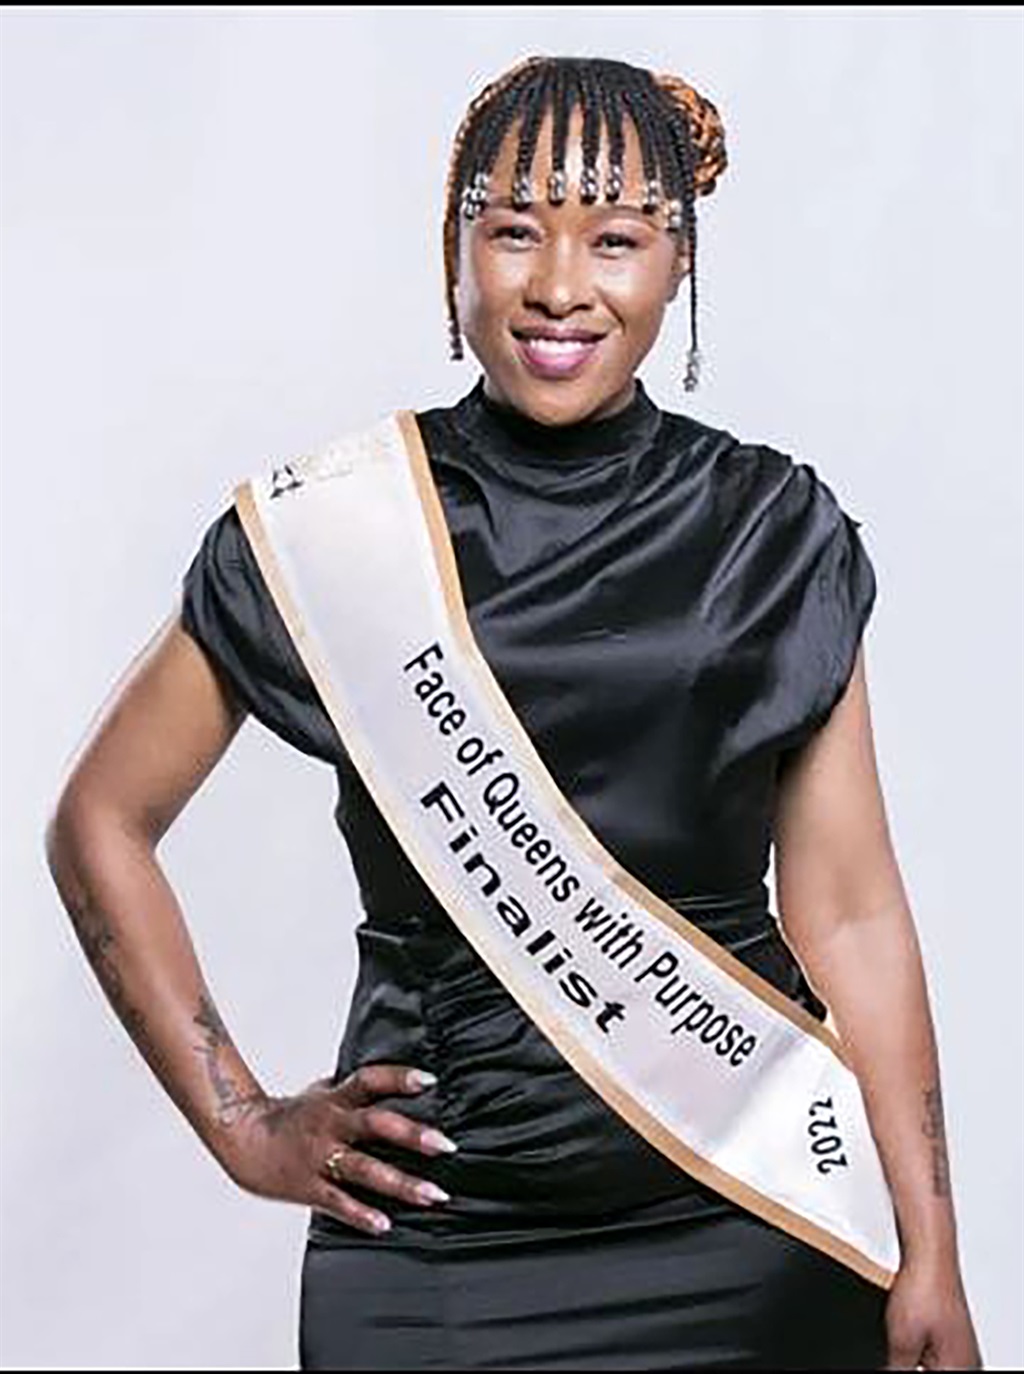 Ntsiki Kubalo runs for Face of Queens with Purpose South Africa. Photo Supplied.